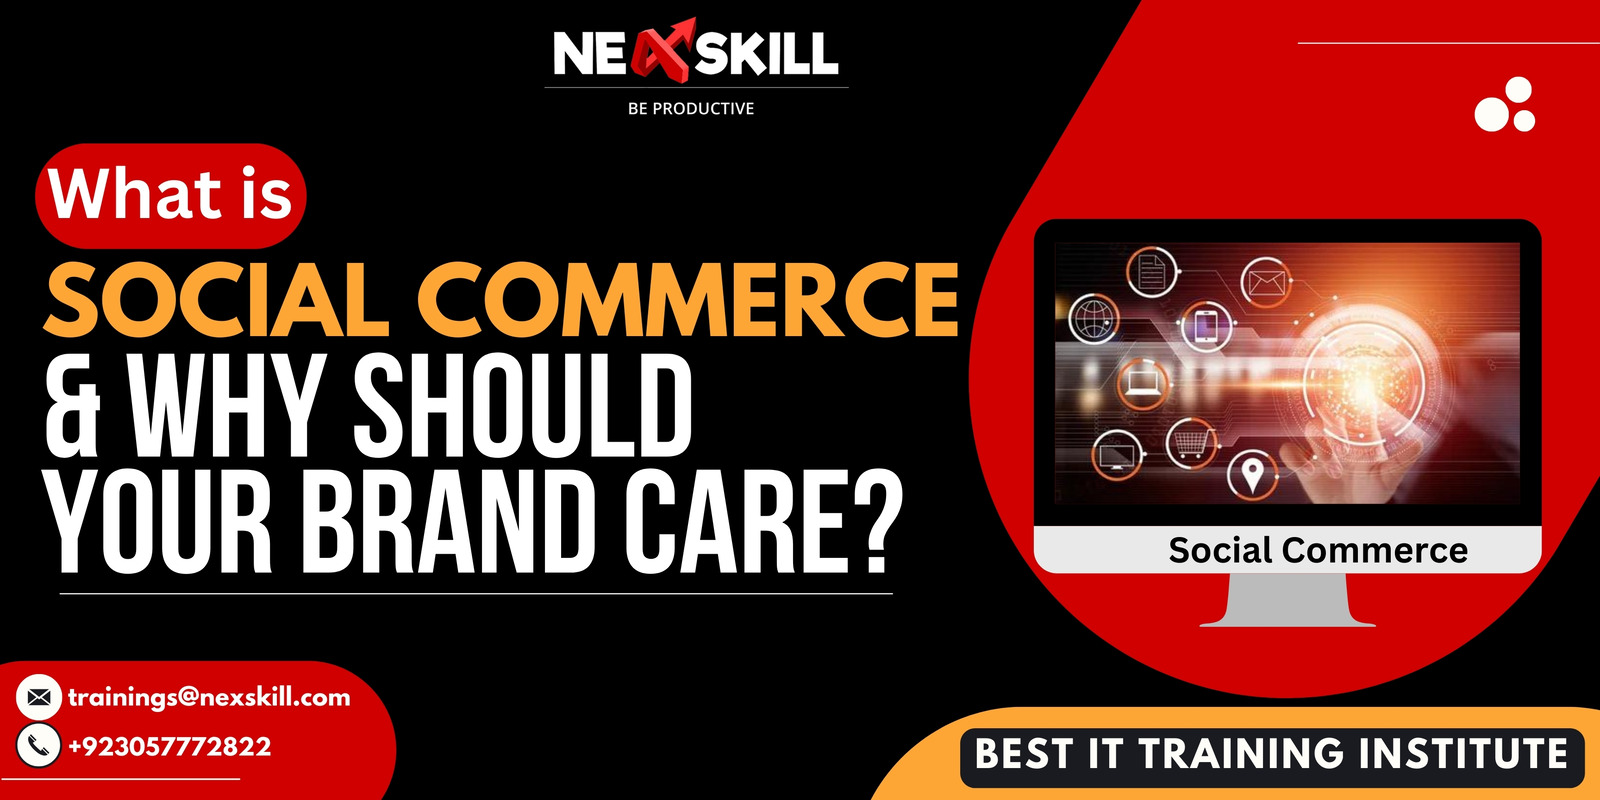 What is Social Commerce and Why Should Your Brand Care?